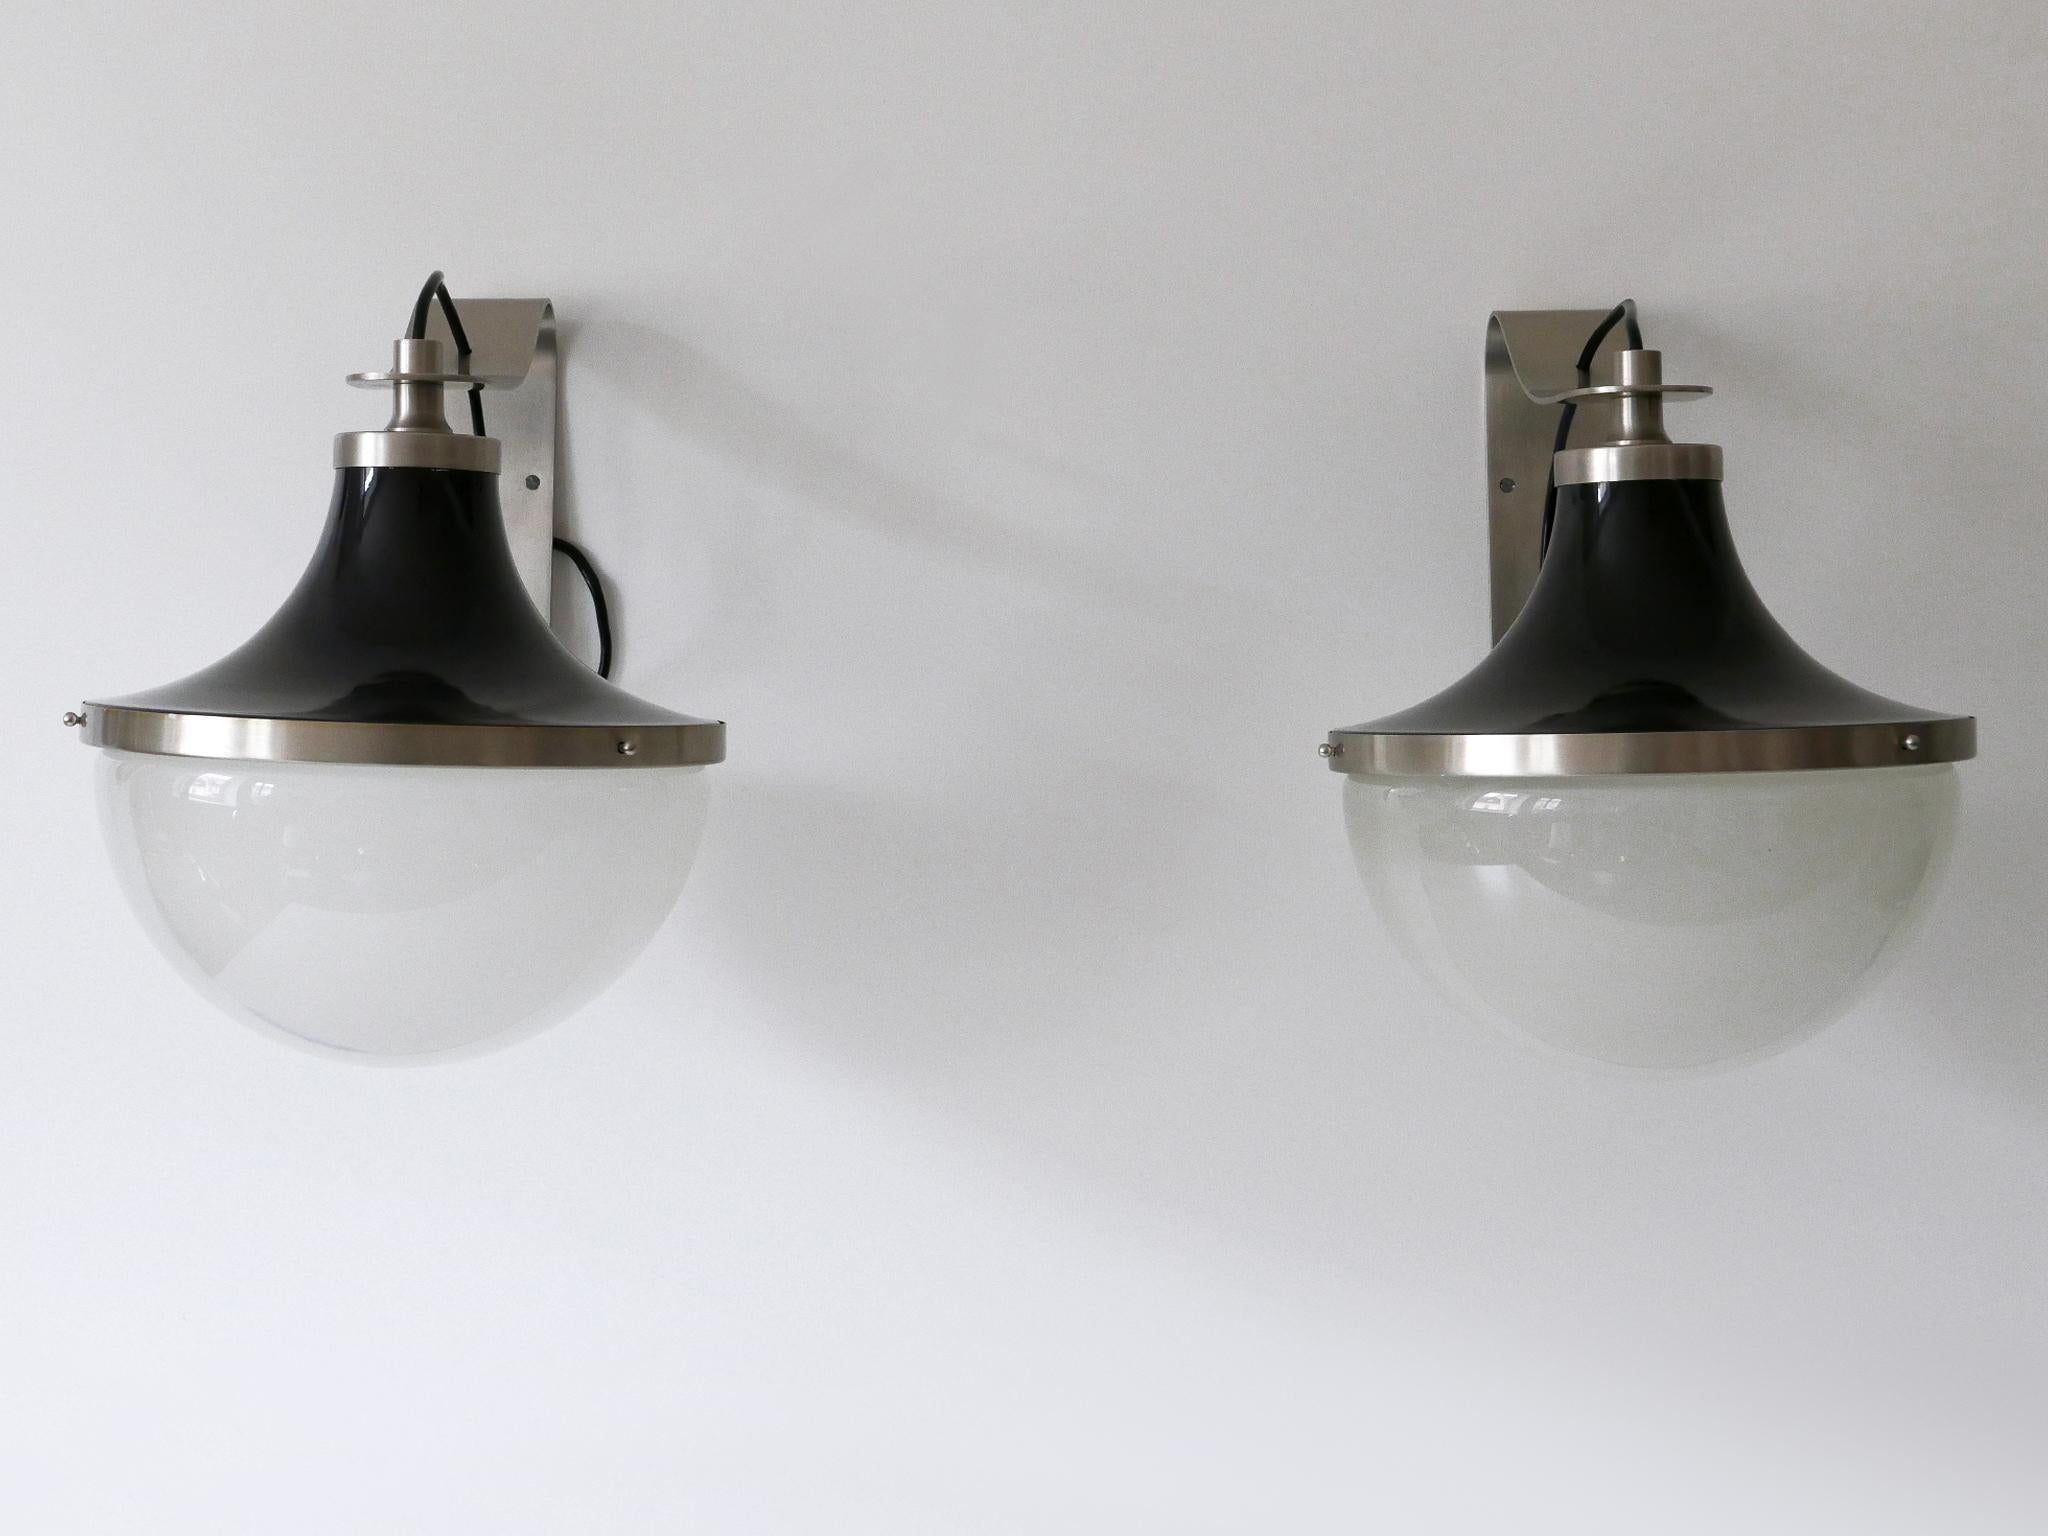 Set of two Mid-Century Modern nickel-plated brass sconces 'Pi'. Designed by Sergio Mazza for Artemide, Italy, 1960s.

Executed in nickel-plated brass and glass; each sconce needs 1 x E27 / E26 Edison screw fit bulb. The sconces are with original